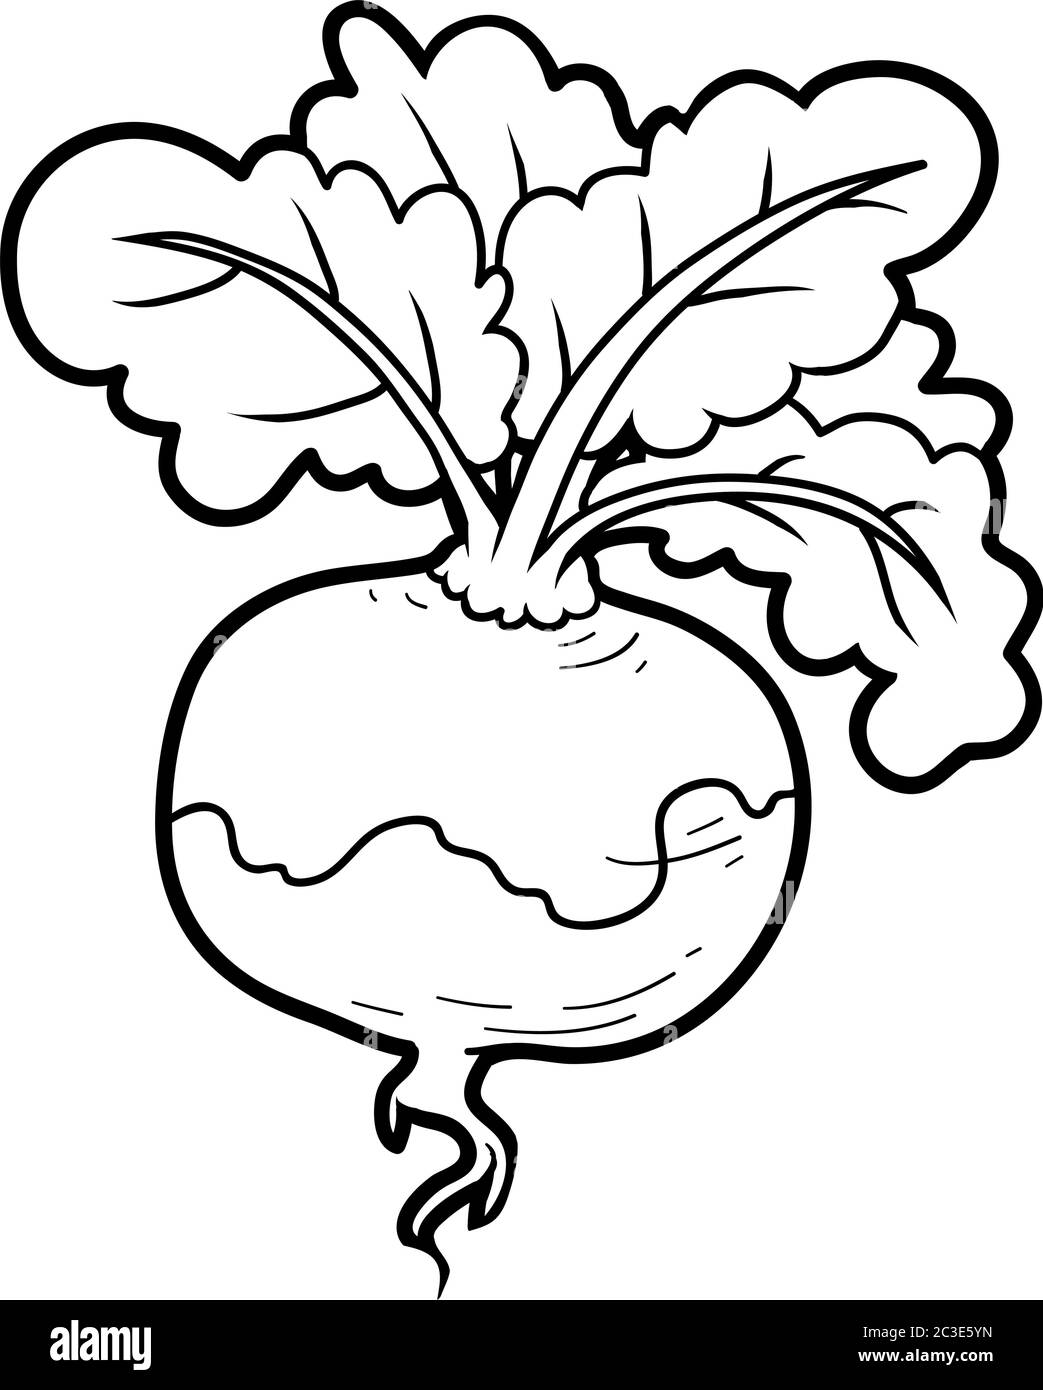 Coloring book for children, vegetables, Turnip Stock Vector